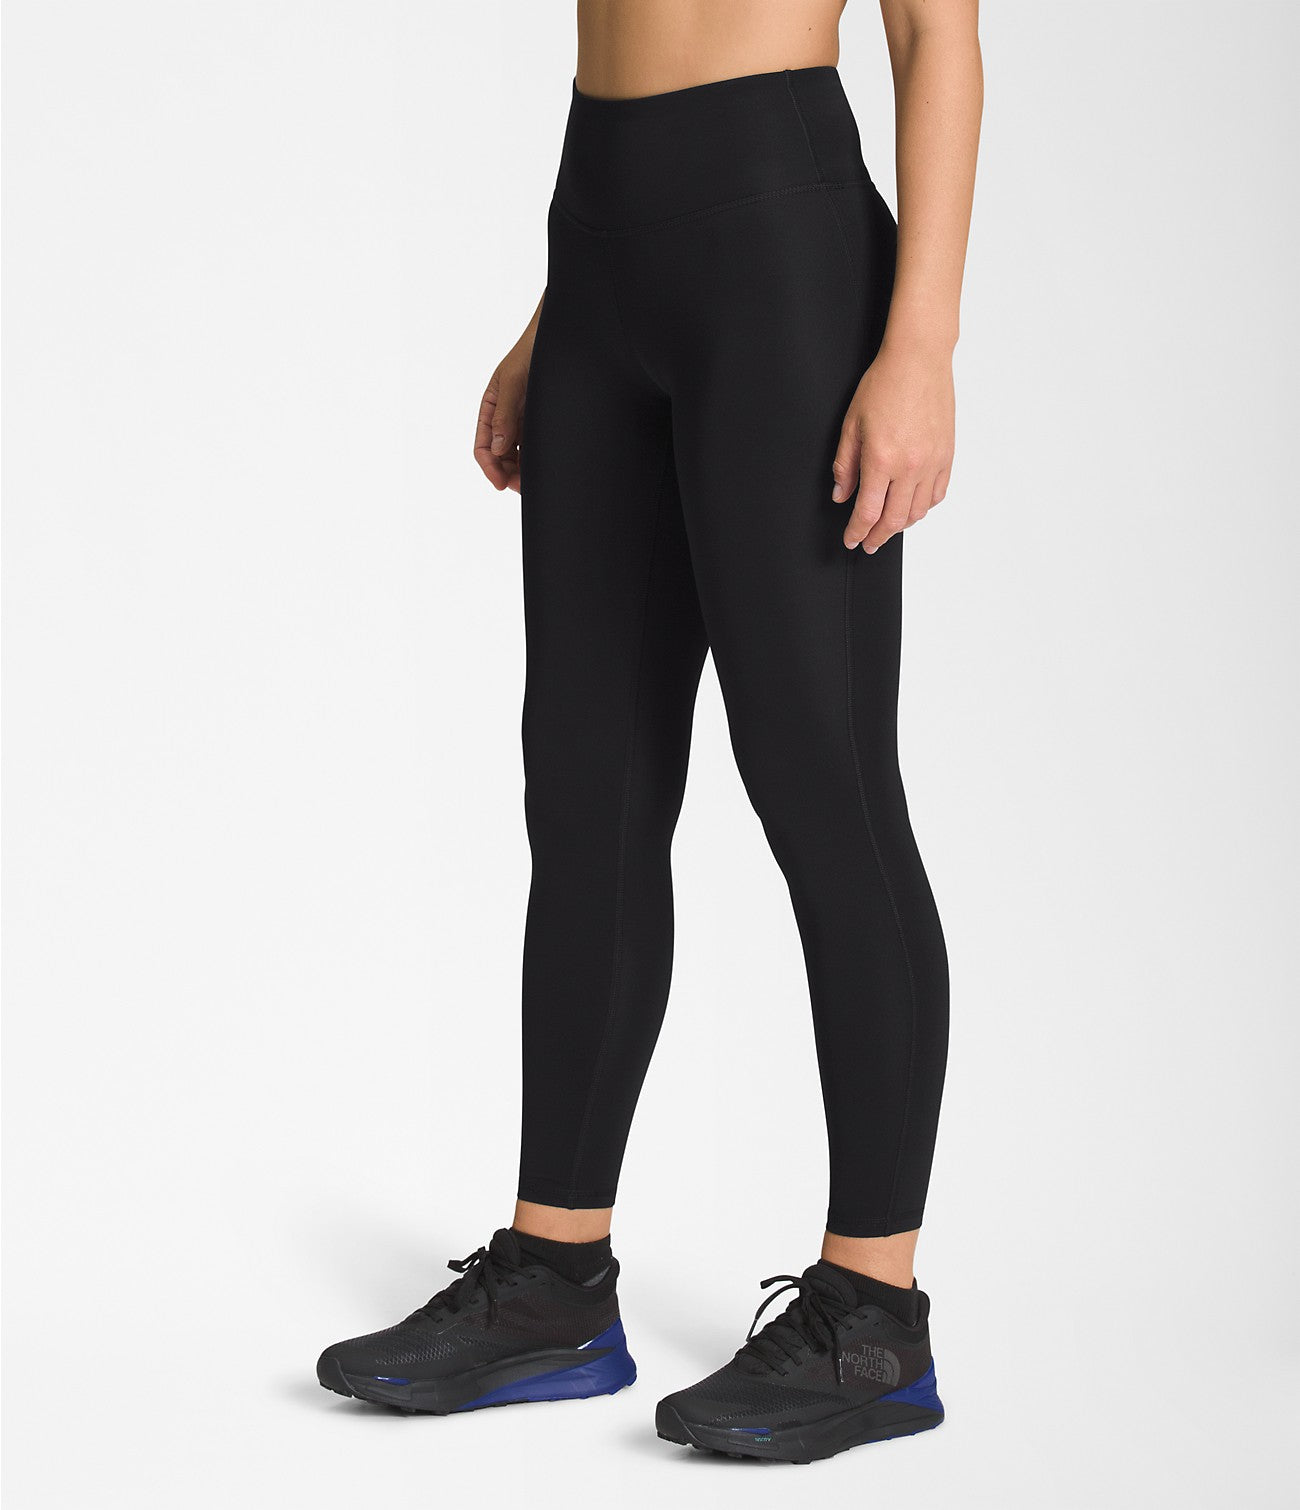 The North Face Women's Winter Warm Pro Tights